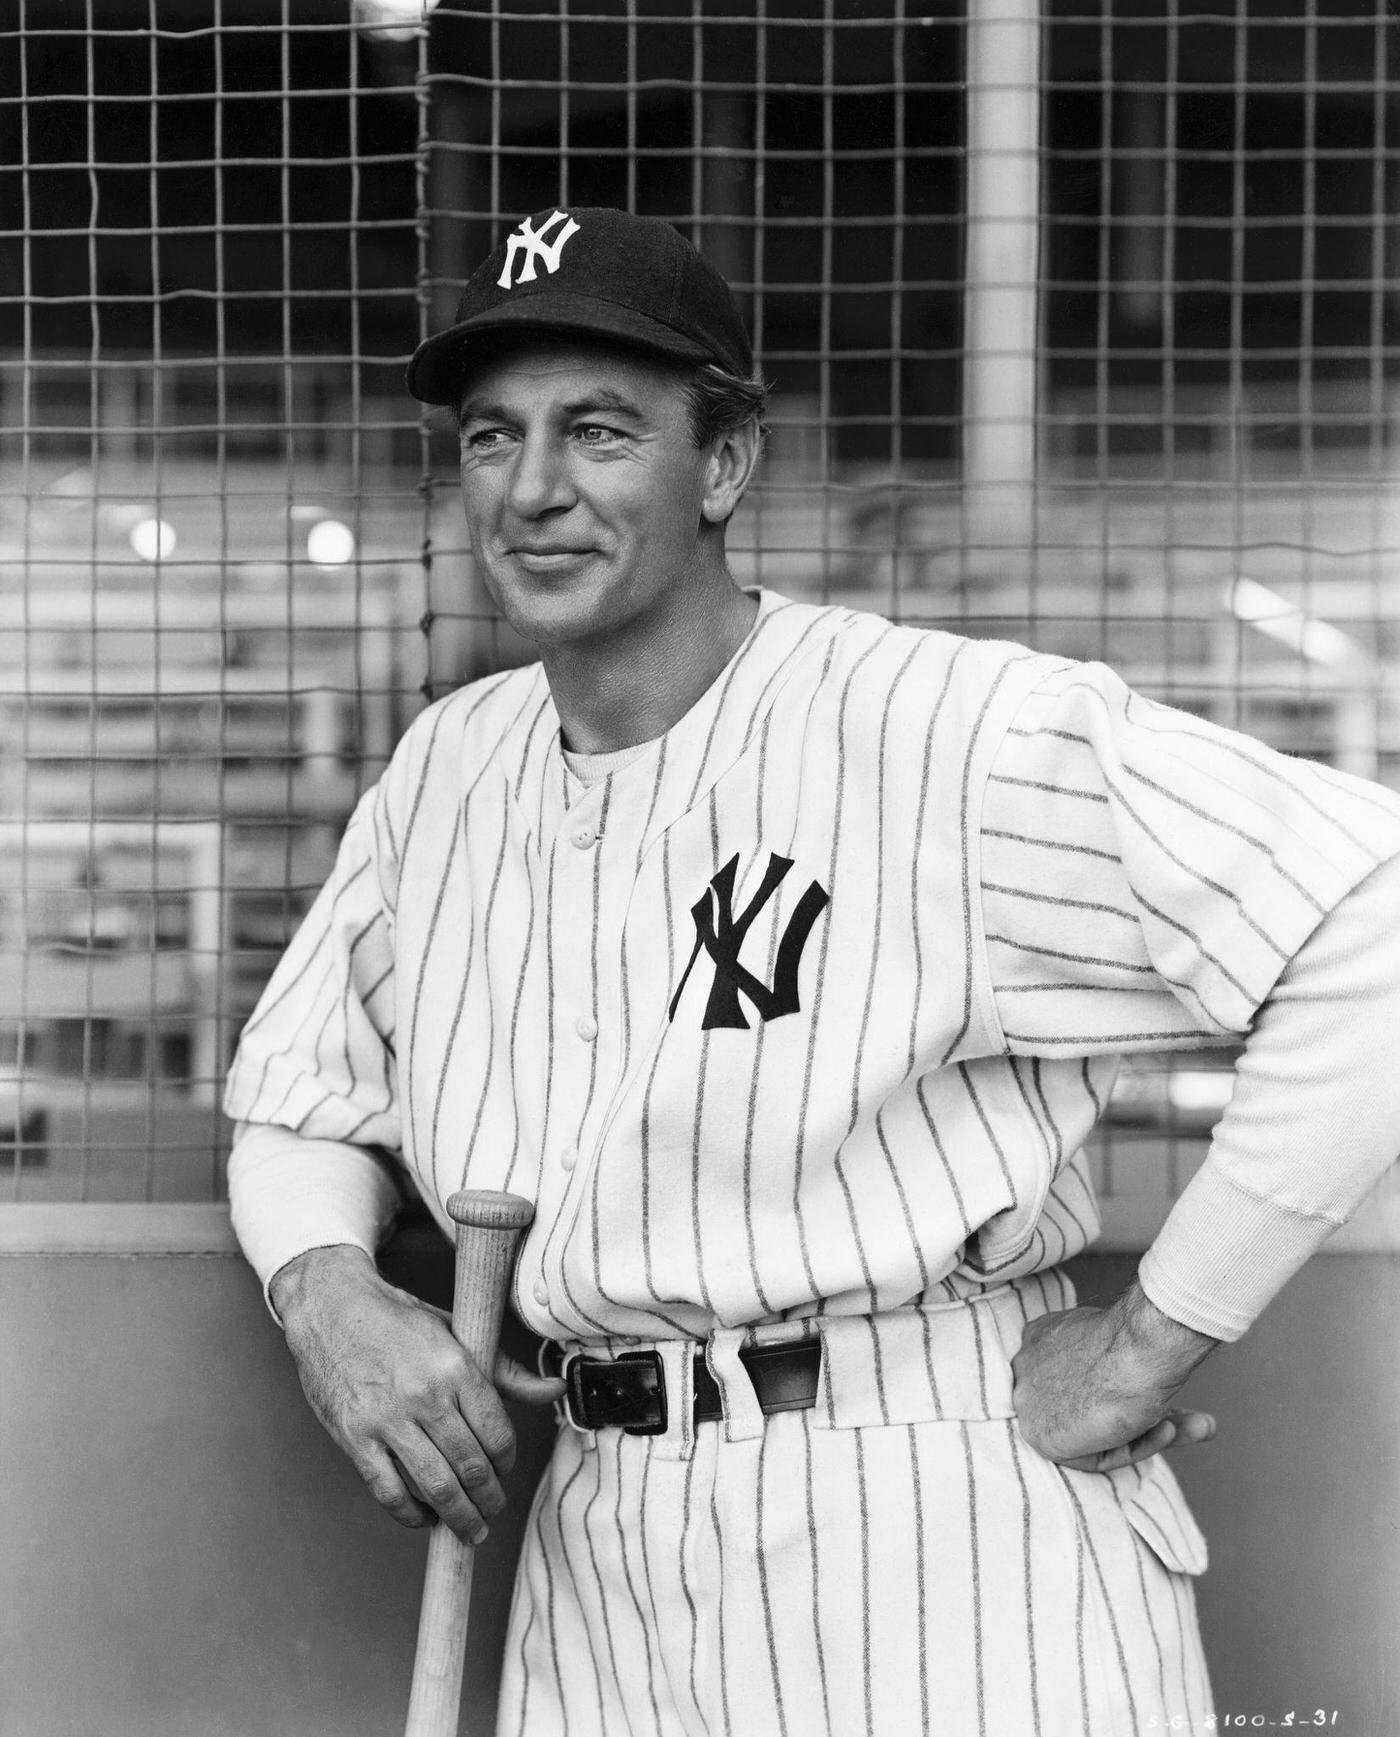 Gary Cooper as Lou Gehrig in a film still from the movie, "Pride of the Yankees," directed by Sam Wood.